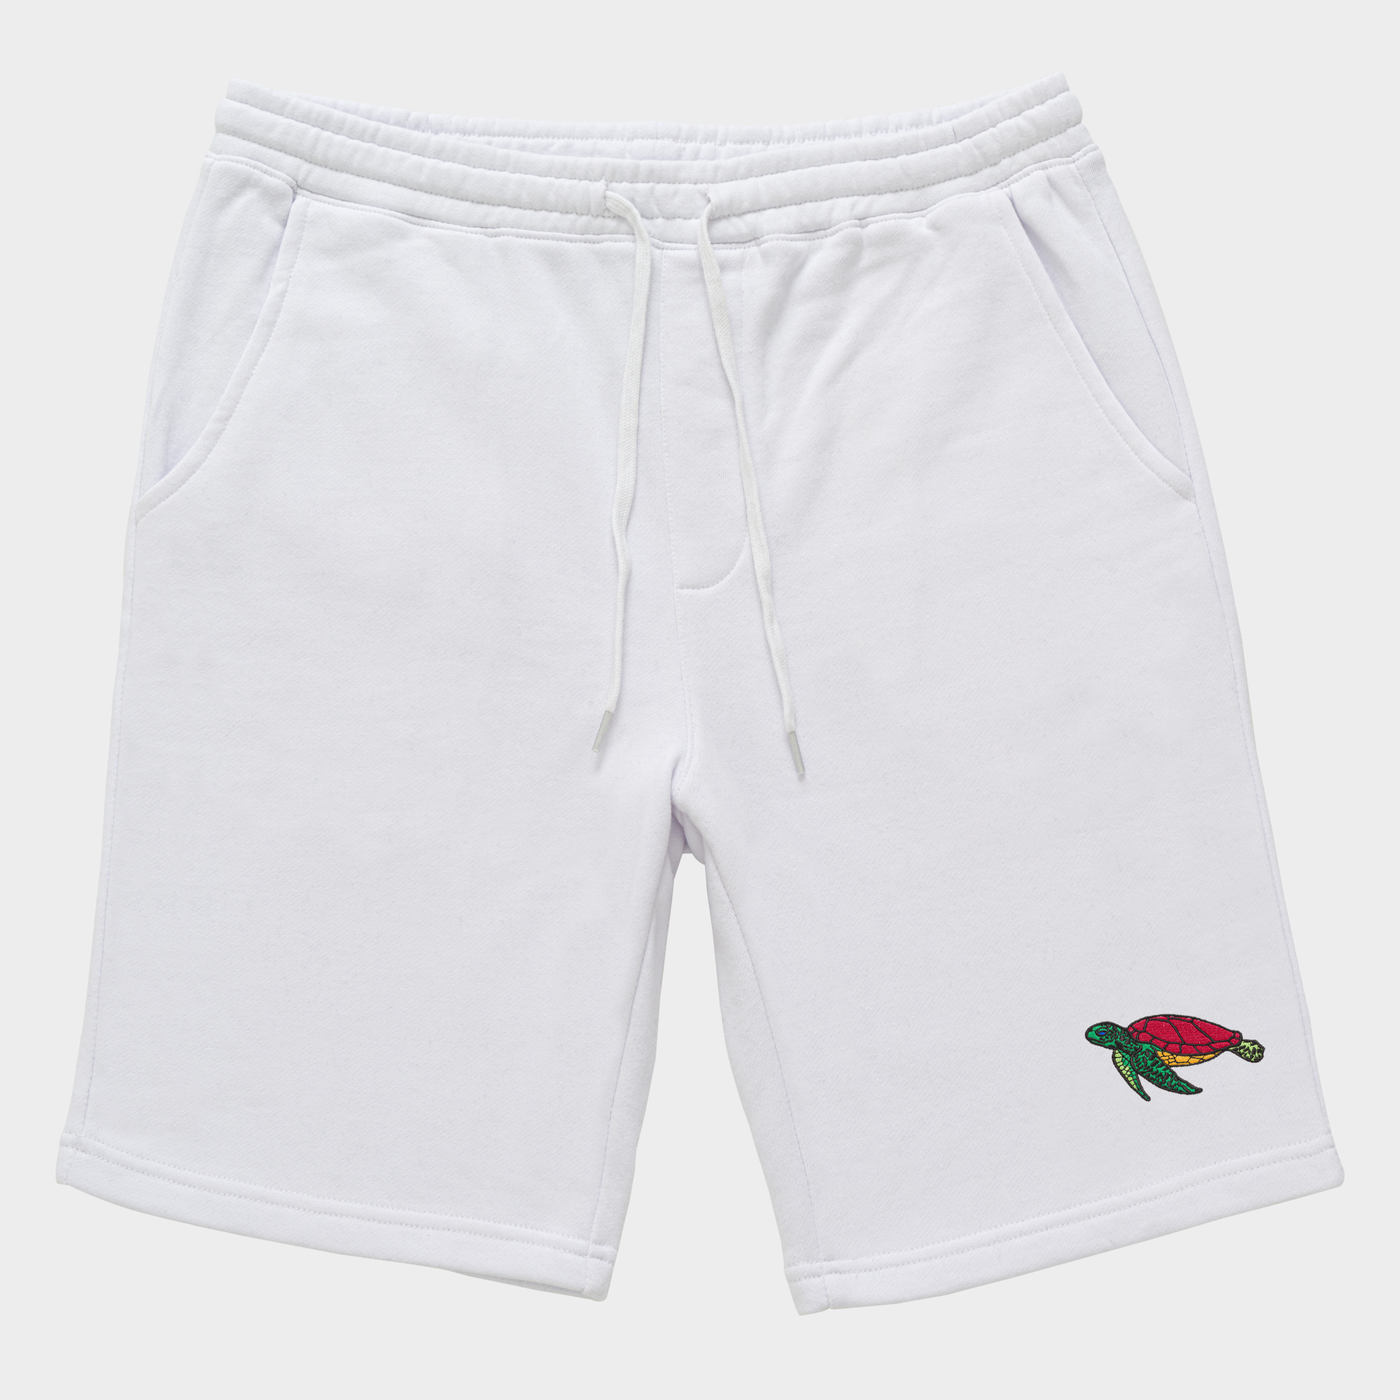 Bobby's Planet Men's Embroidered Sea Turtle Shorts from Seven Seas Fish Animals Collection in White Color#color_white